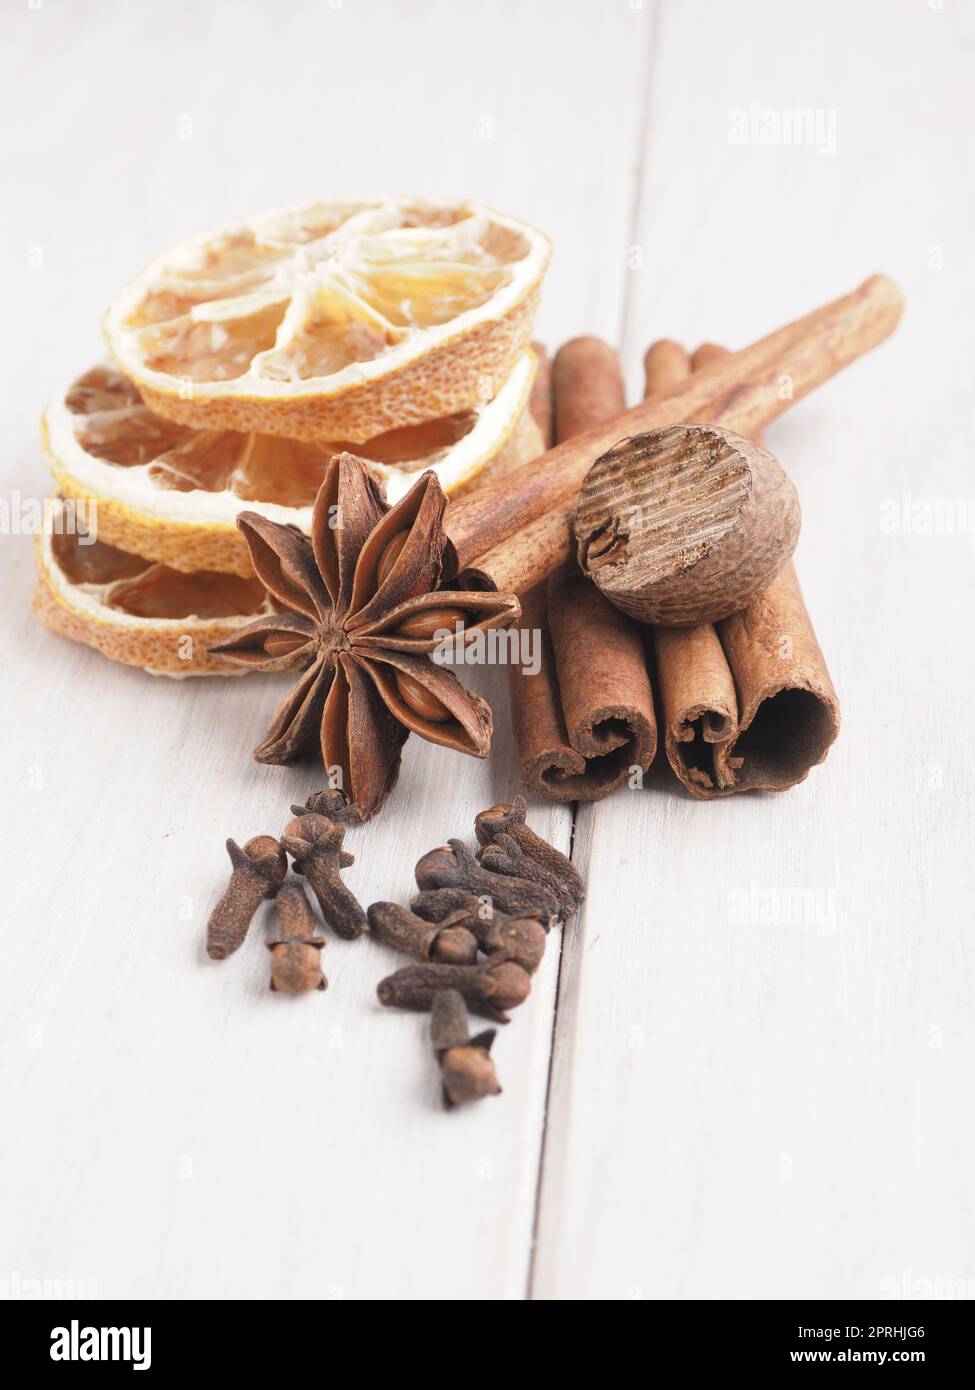 Different Christmas spices on a wooden table, seasonal food or ingredients Stock Photo